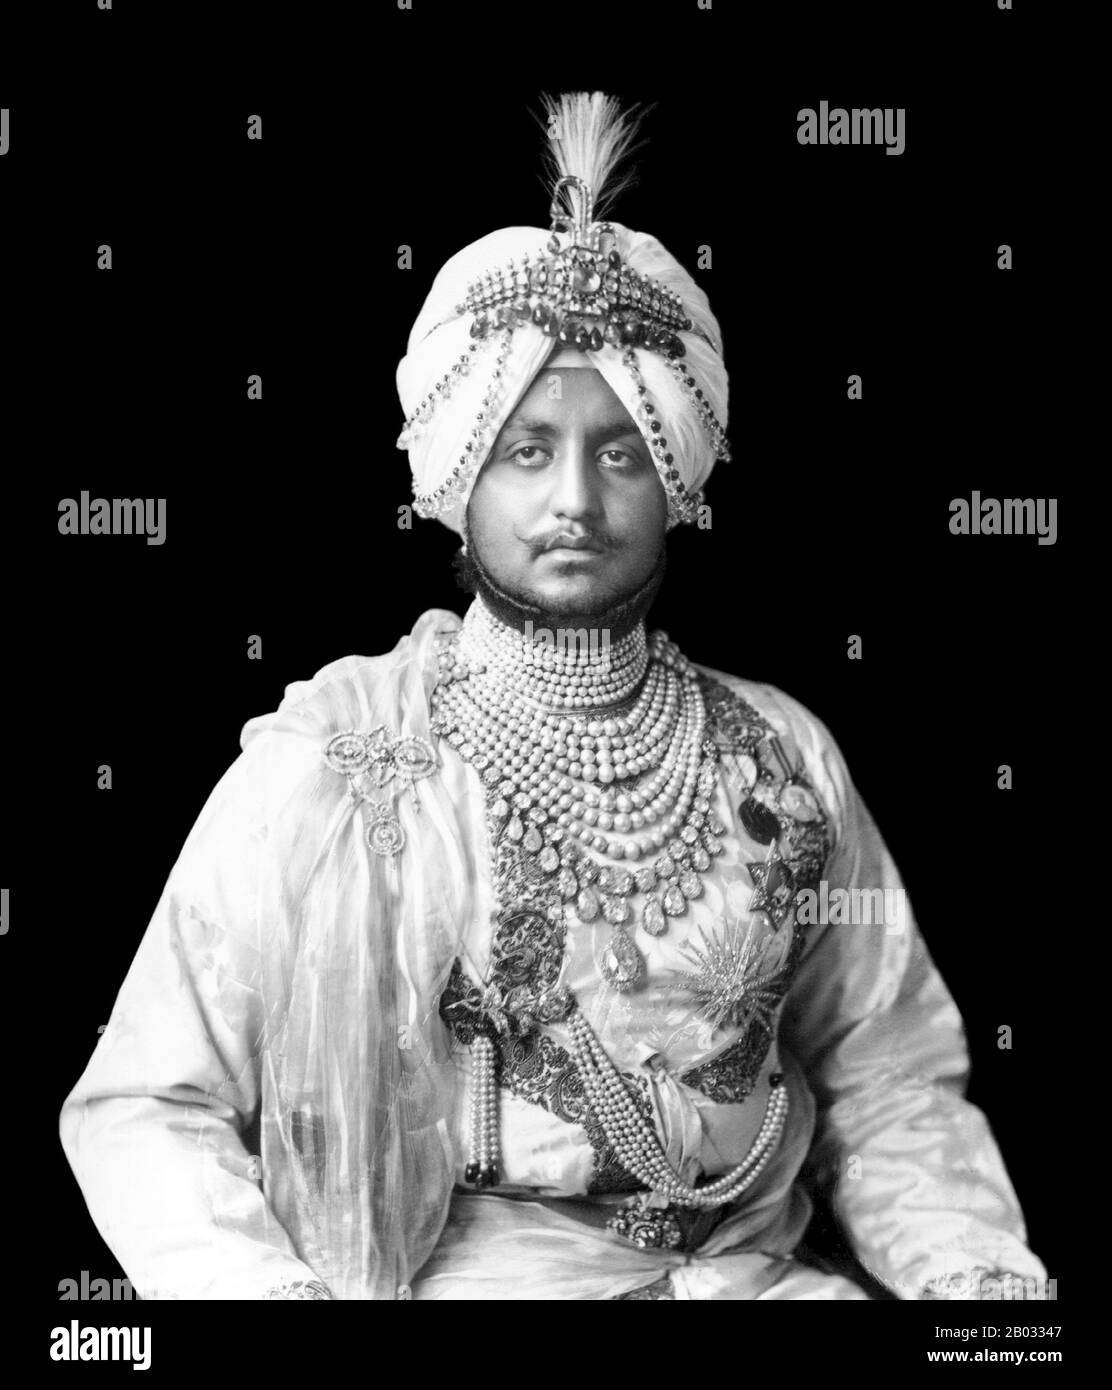 Bhupinder Singh was born at the Moti Bagh Palace, Patiala and educated at Aitchison College. At age 9, he succeeded as maharaja of Patiala state upon the death of his father, Maharaja Rajinder Singh, on 9 November 1900. A Council of Regency ruled in his name until he took partial powers shortly before his 18th birthday on 1 October 1909 and was invested with full powers by the Viceroy of India, the 4th Earl of Minto, on 3 November 1910.  He served on the General Staff in France, Belgium, Italy and Palestine in the First World War as an Honorary Lieutenant-Colonel, and was promoted Honorary Maj Stock Photo